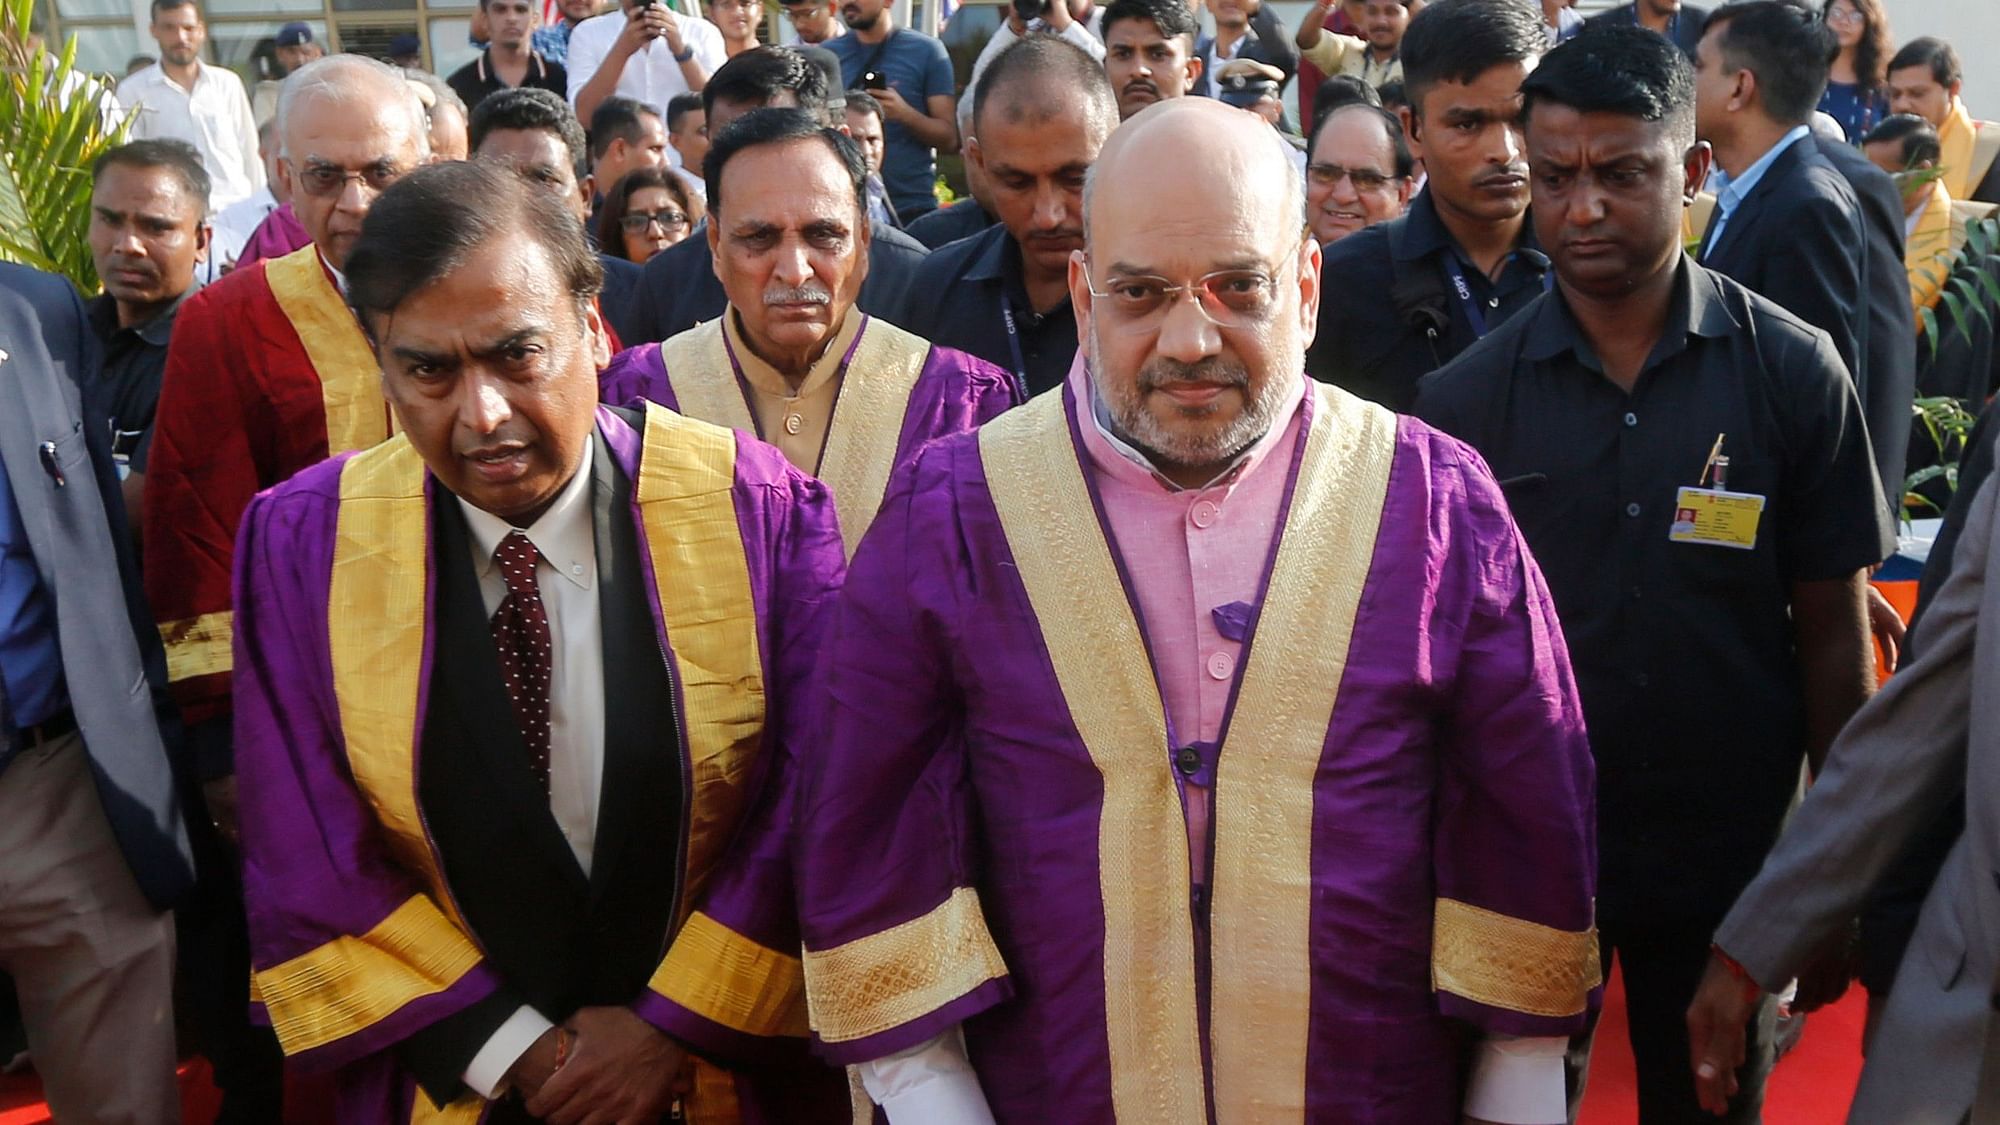 Home Minister Amit Shah and Reliance Chairman Mukesh Ambani arrive to attend a convocation ceremony at the Pandit Deendayal Petroleum University in Gandhinagar.&nbsp;